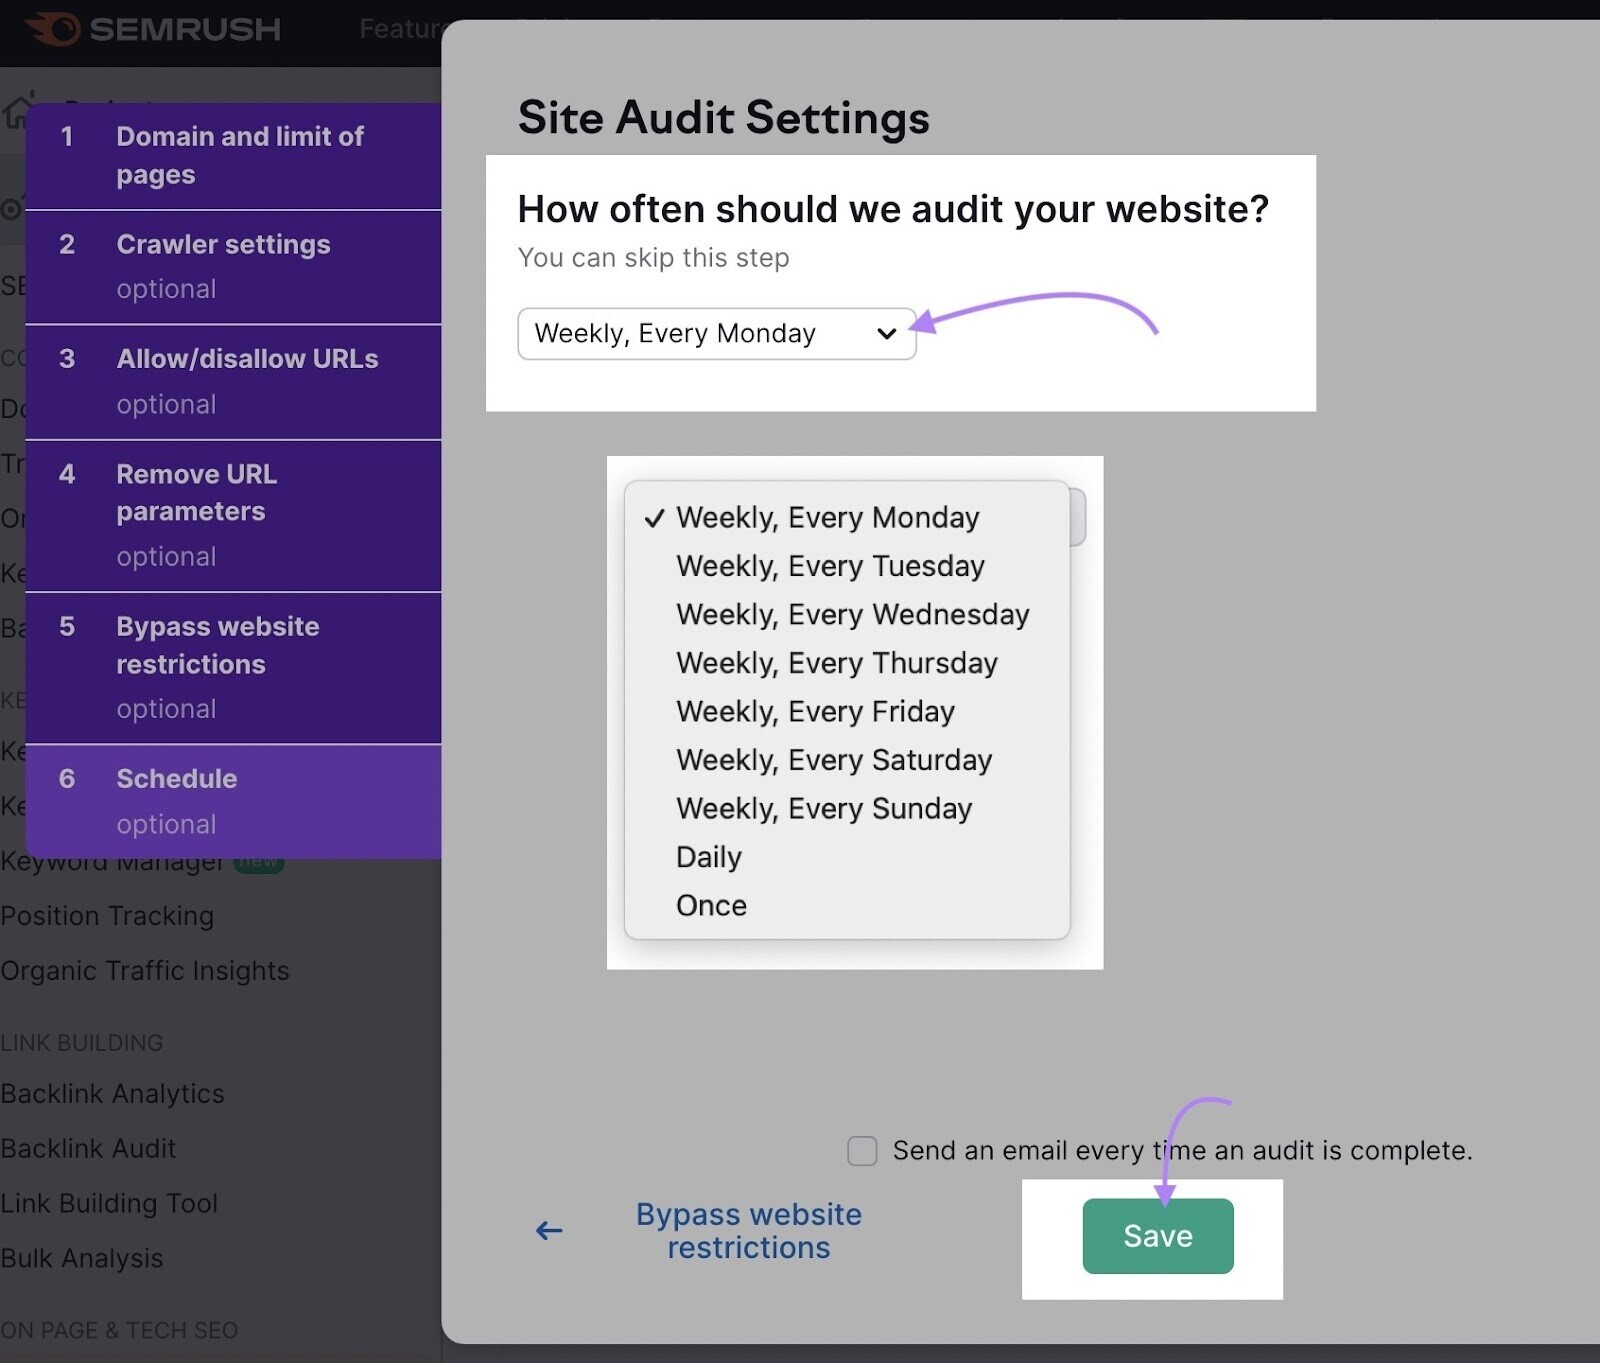 "How often should we audit your website?" section in Site Audit settings